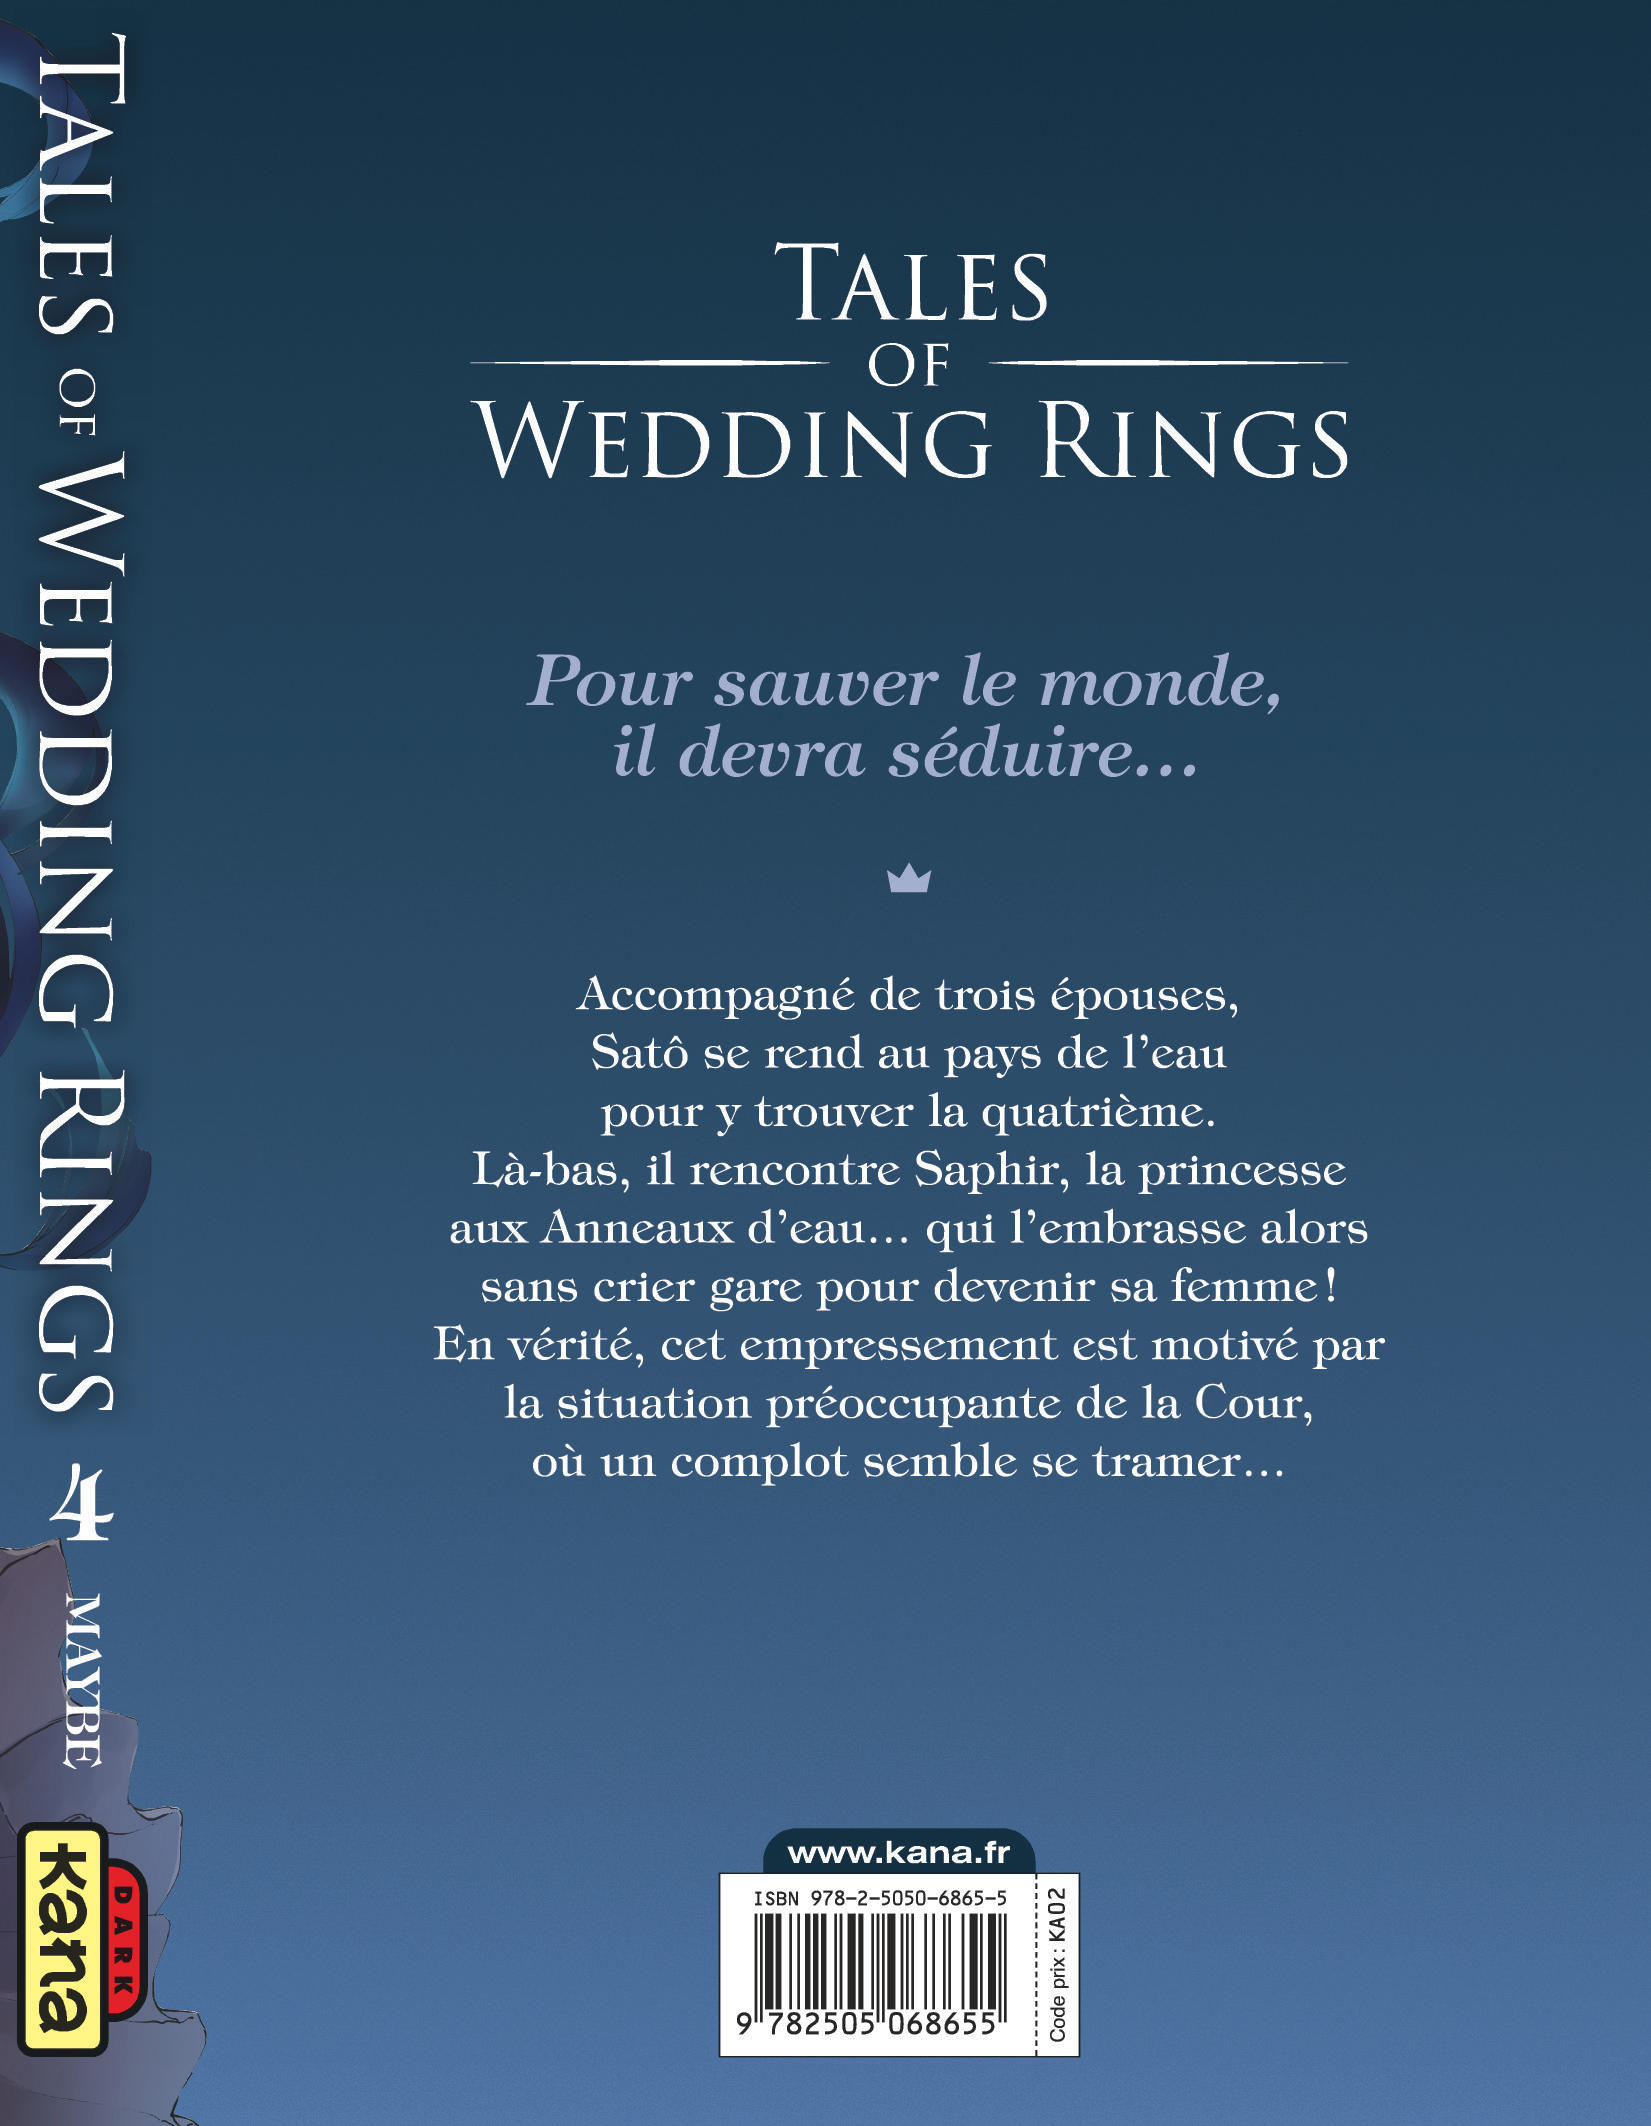 Tales of wedding rings – Tome 4 - 4eme